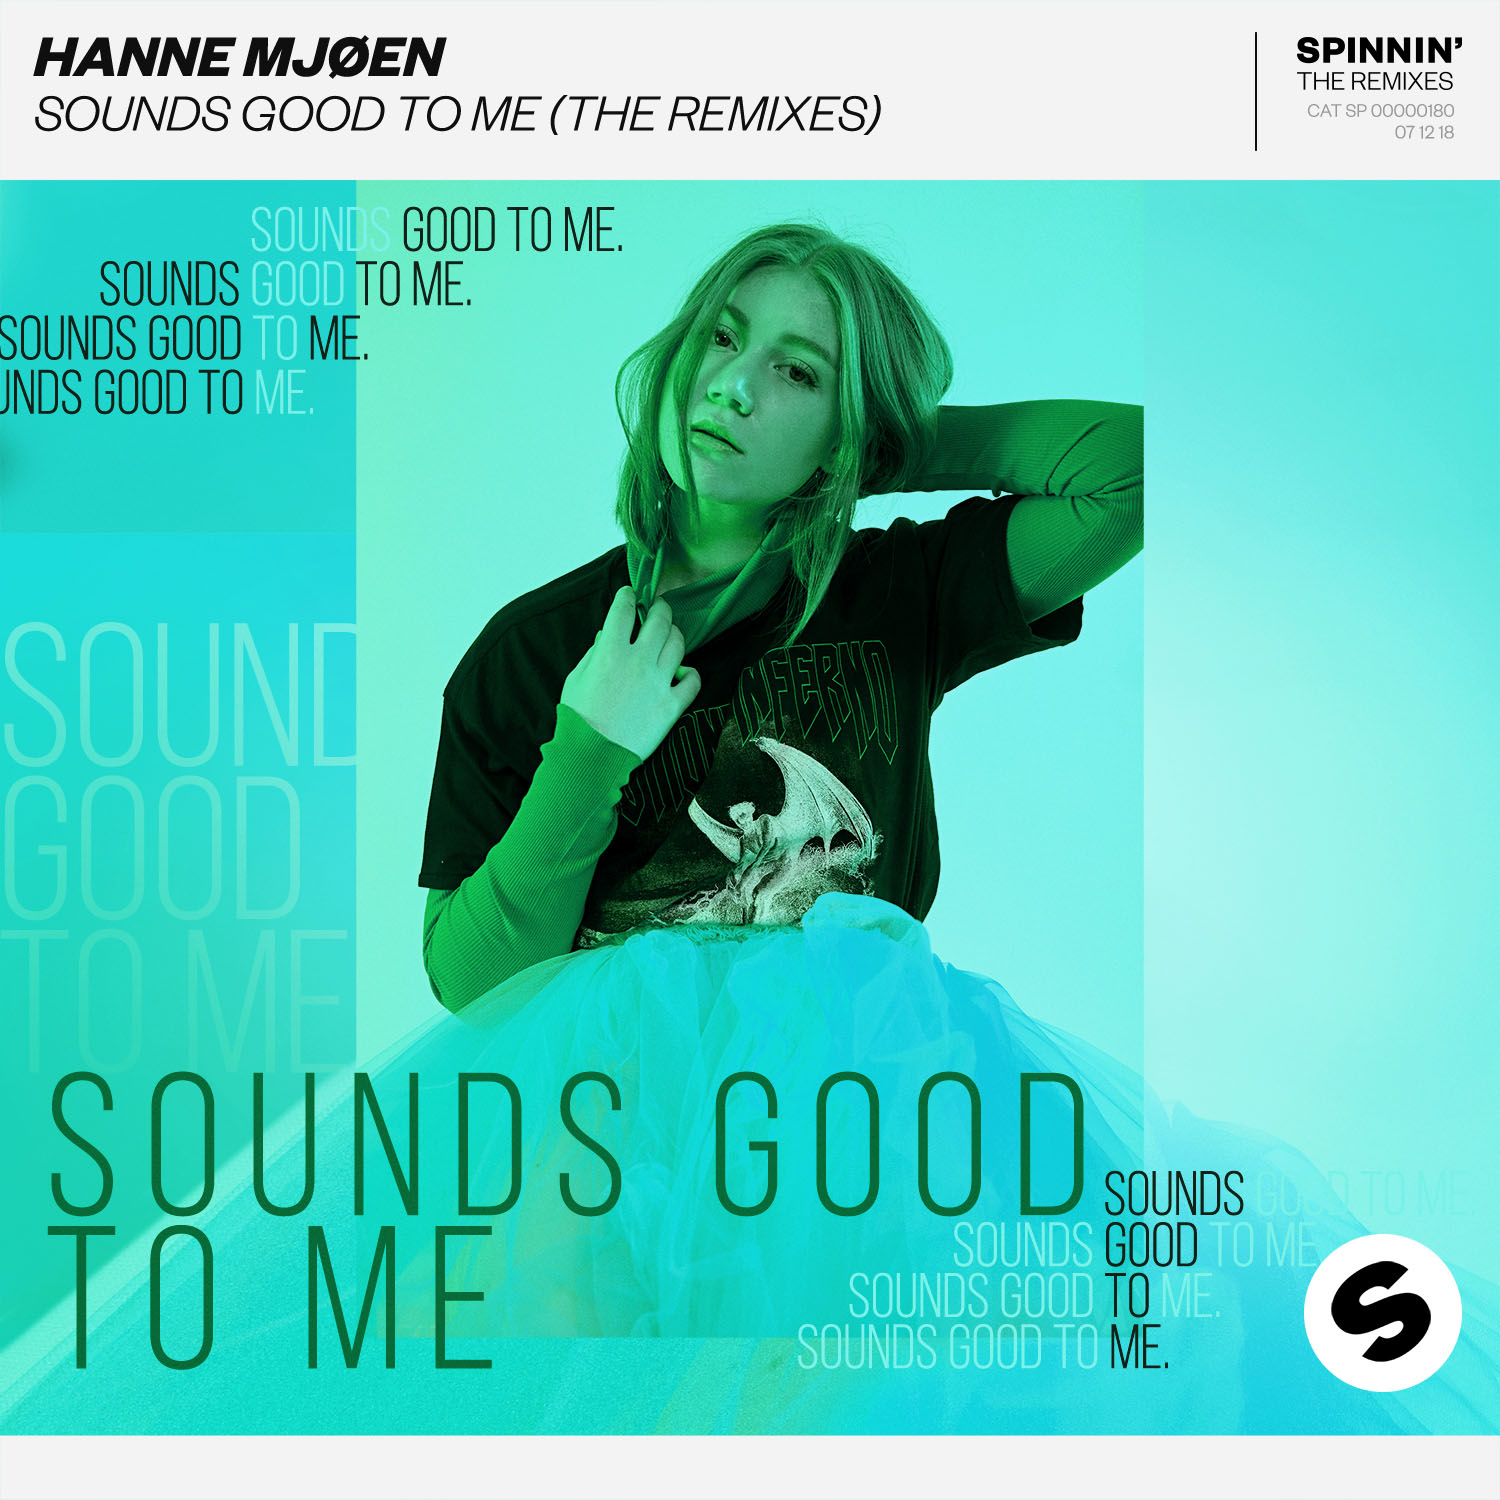 Hanne Mjøen unveils eclectic remix package of fresh hit ‘Sounds Good To Me’